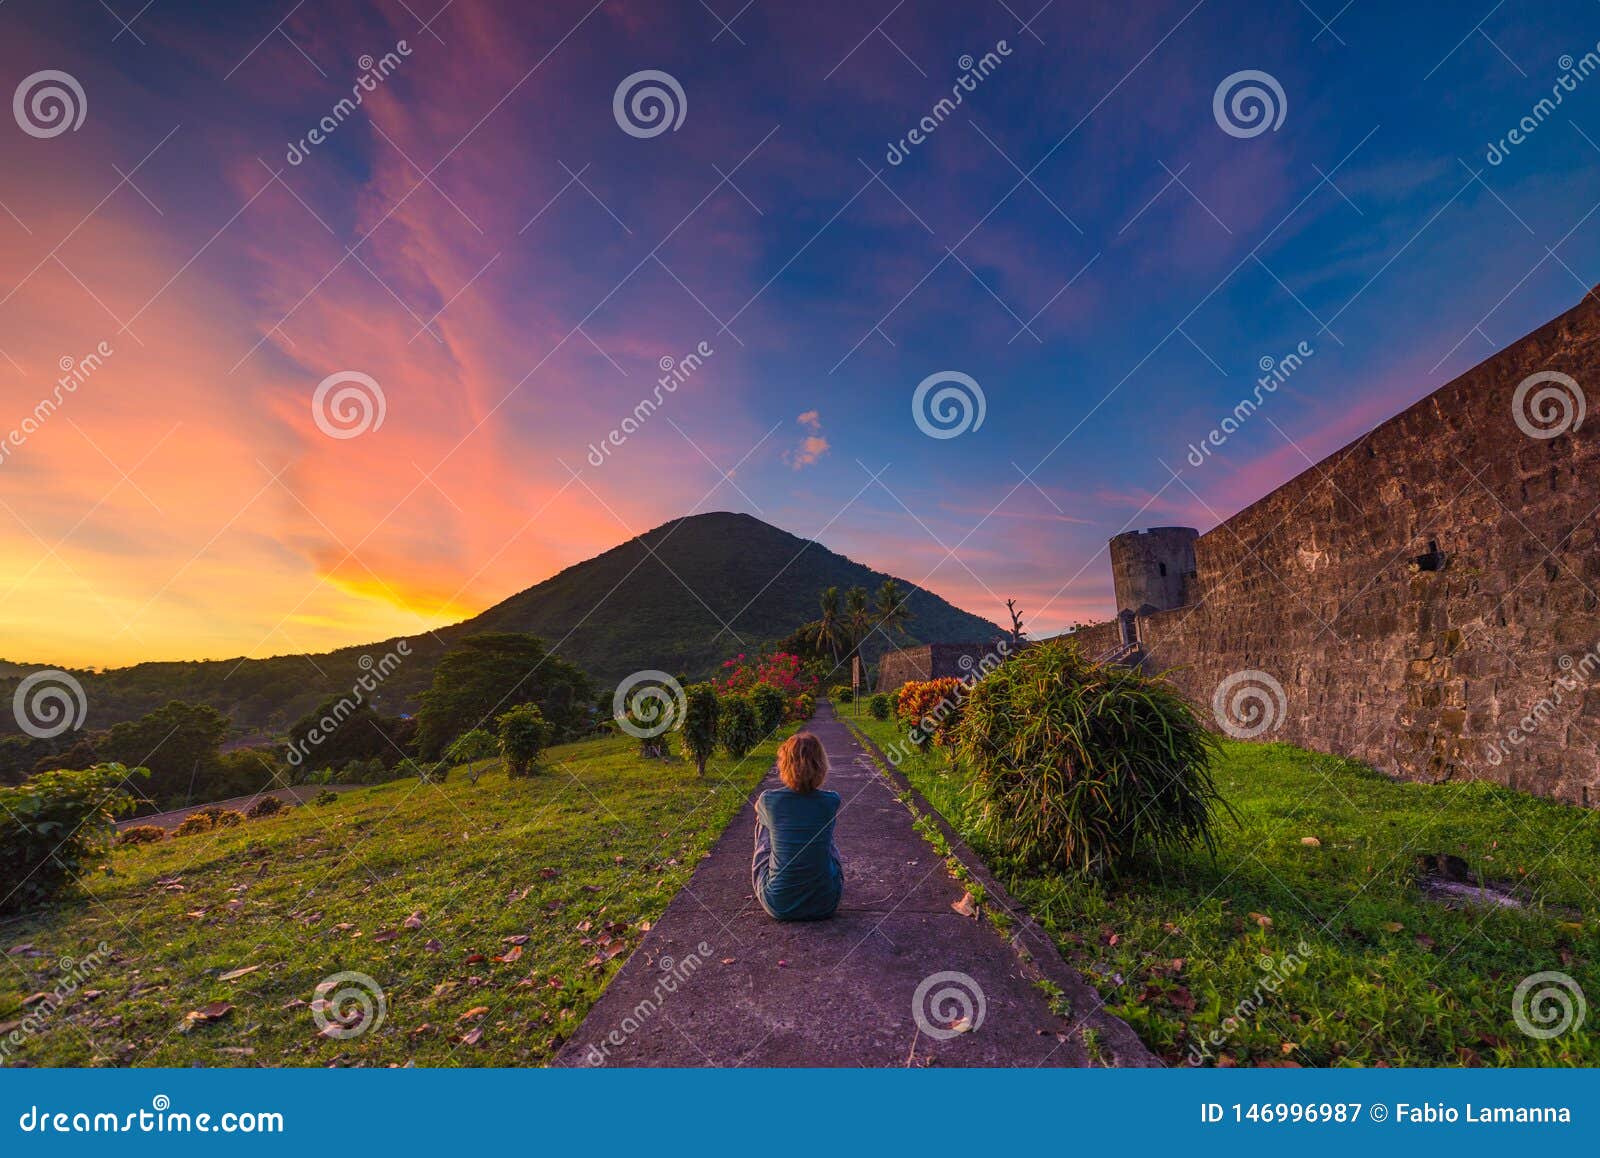  Api  Volcano At Sunset  Sitting Woman Looking At View From 